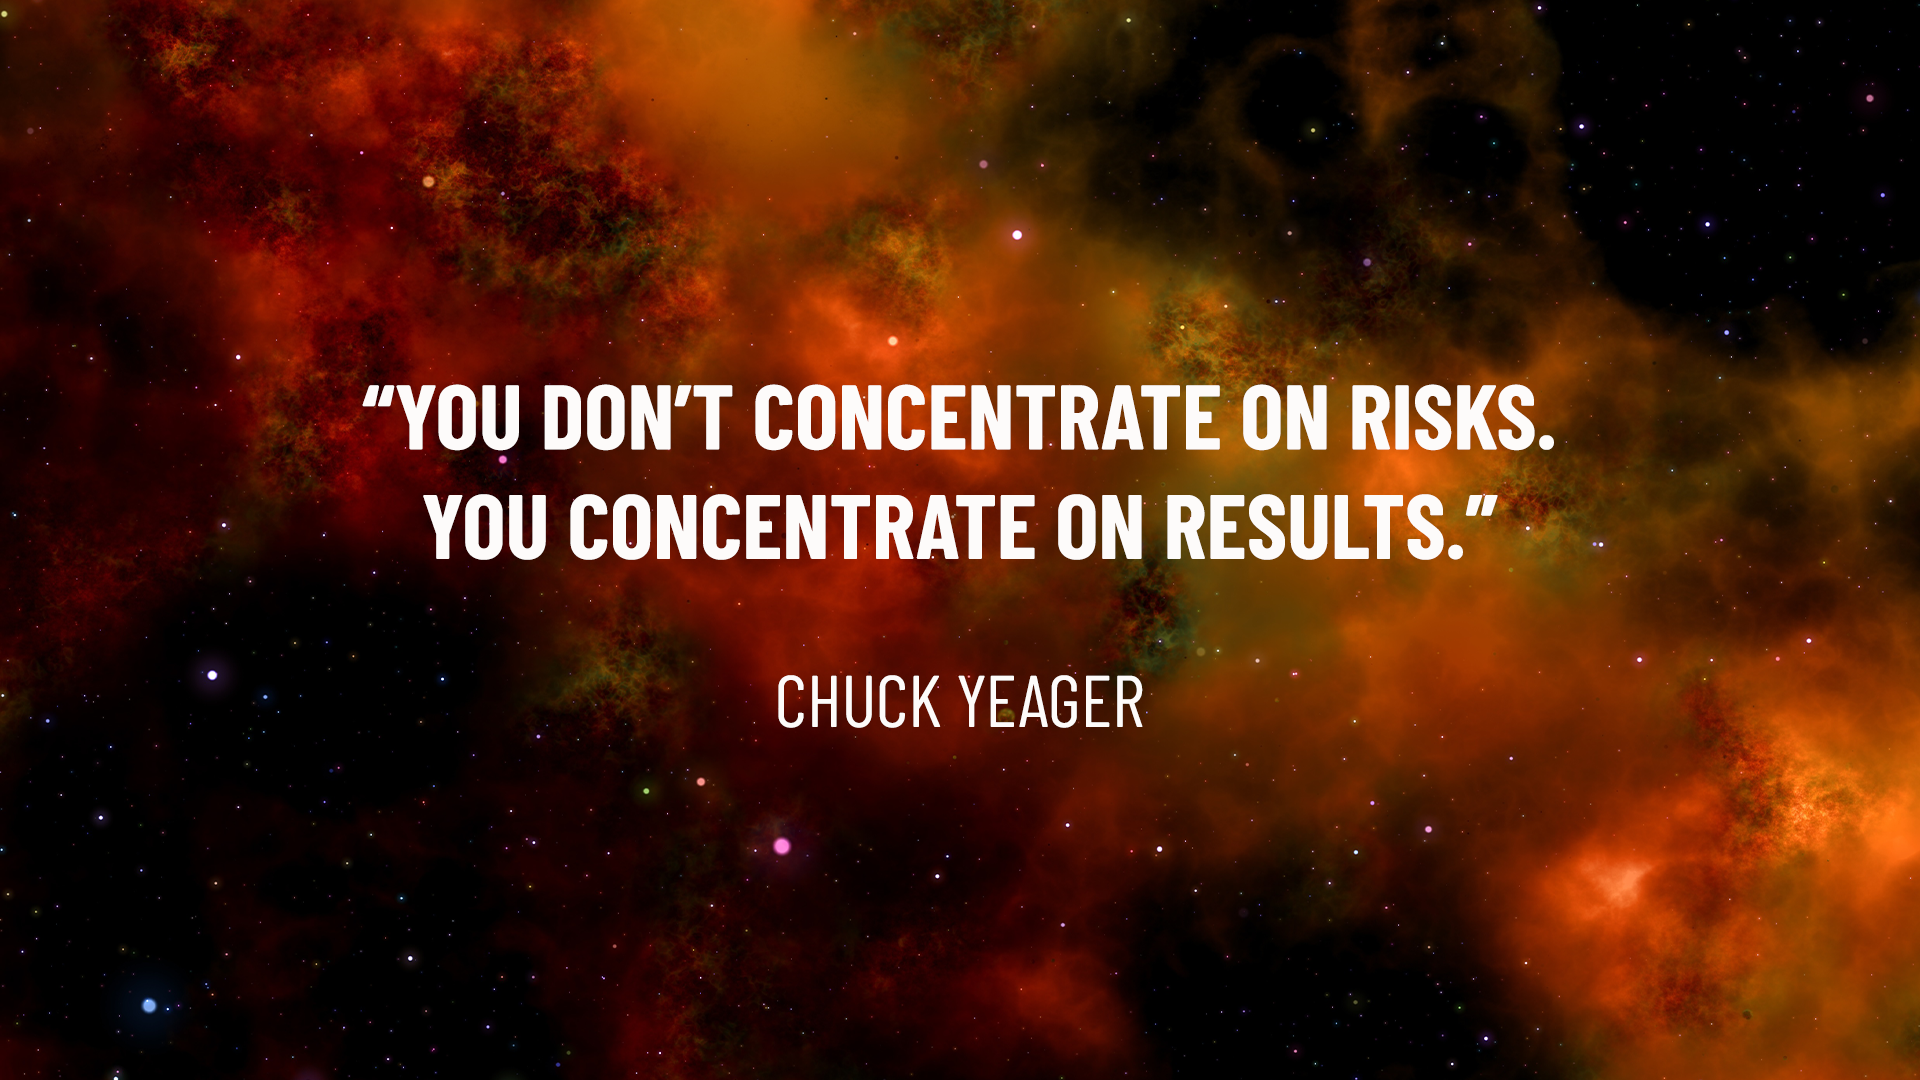 Free Graphic | Inspirational Quotes | Quote by Chuck Yeager